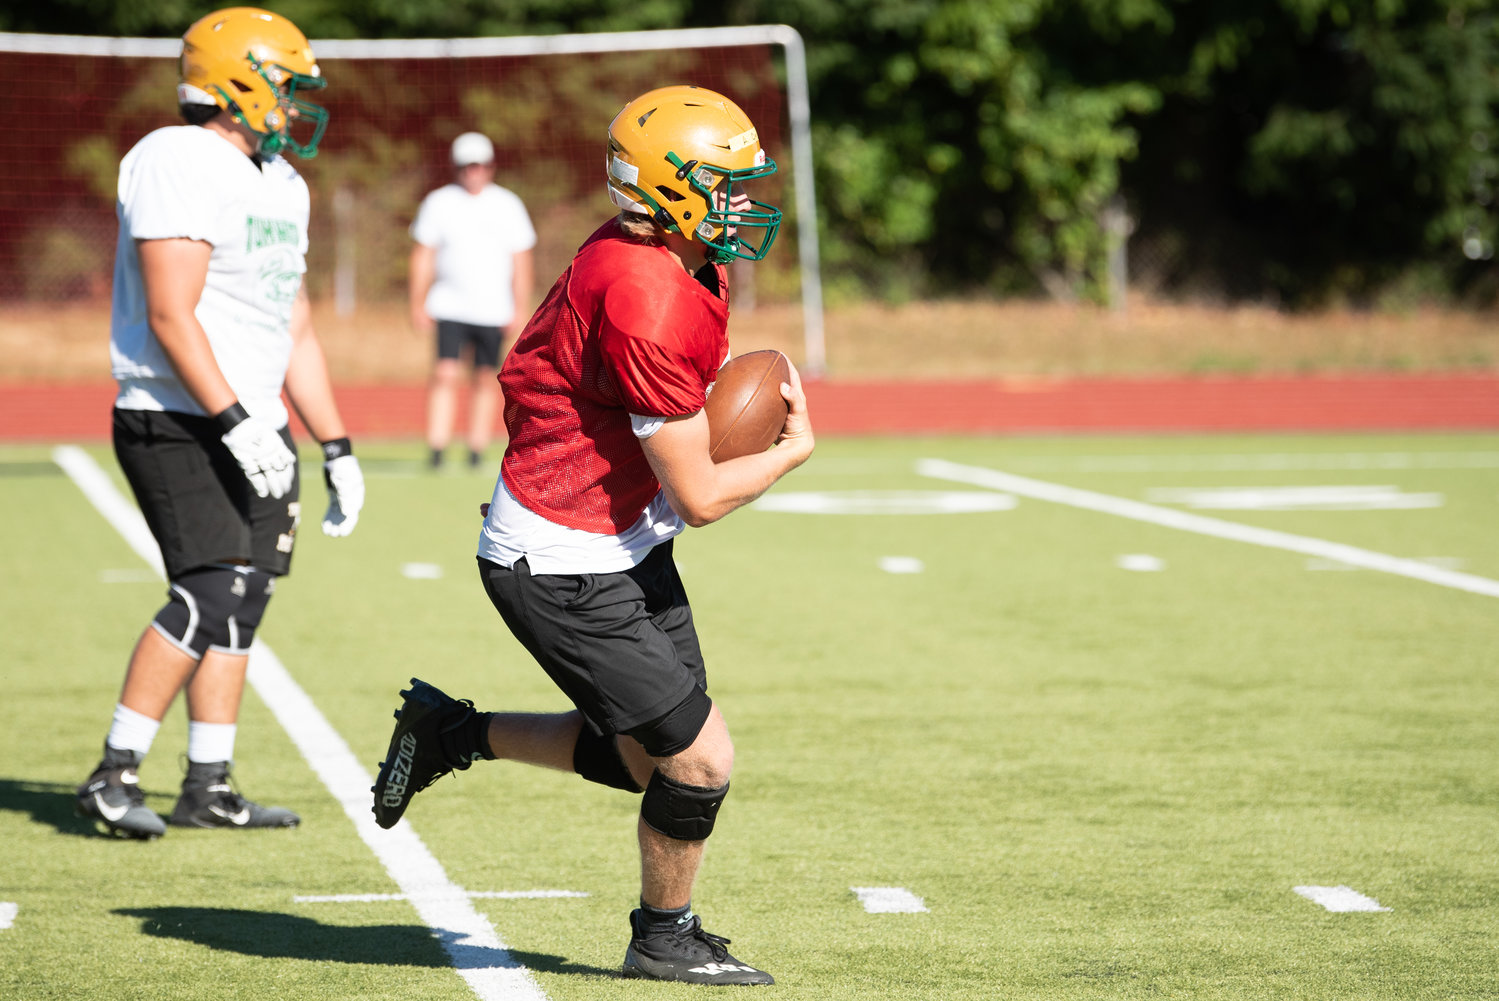 Quarterback Alex Overbay takes it on a carry during Tumwaters' Aug. 22 practice.